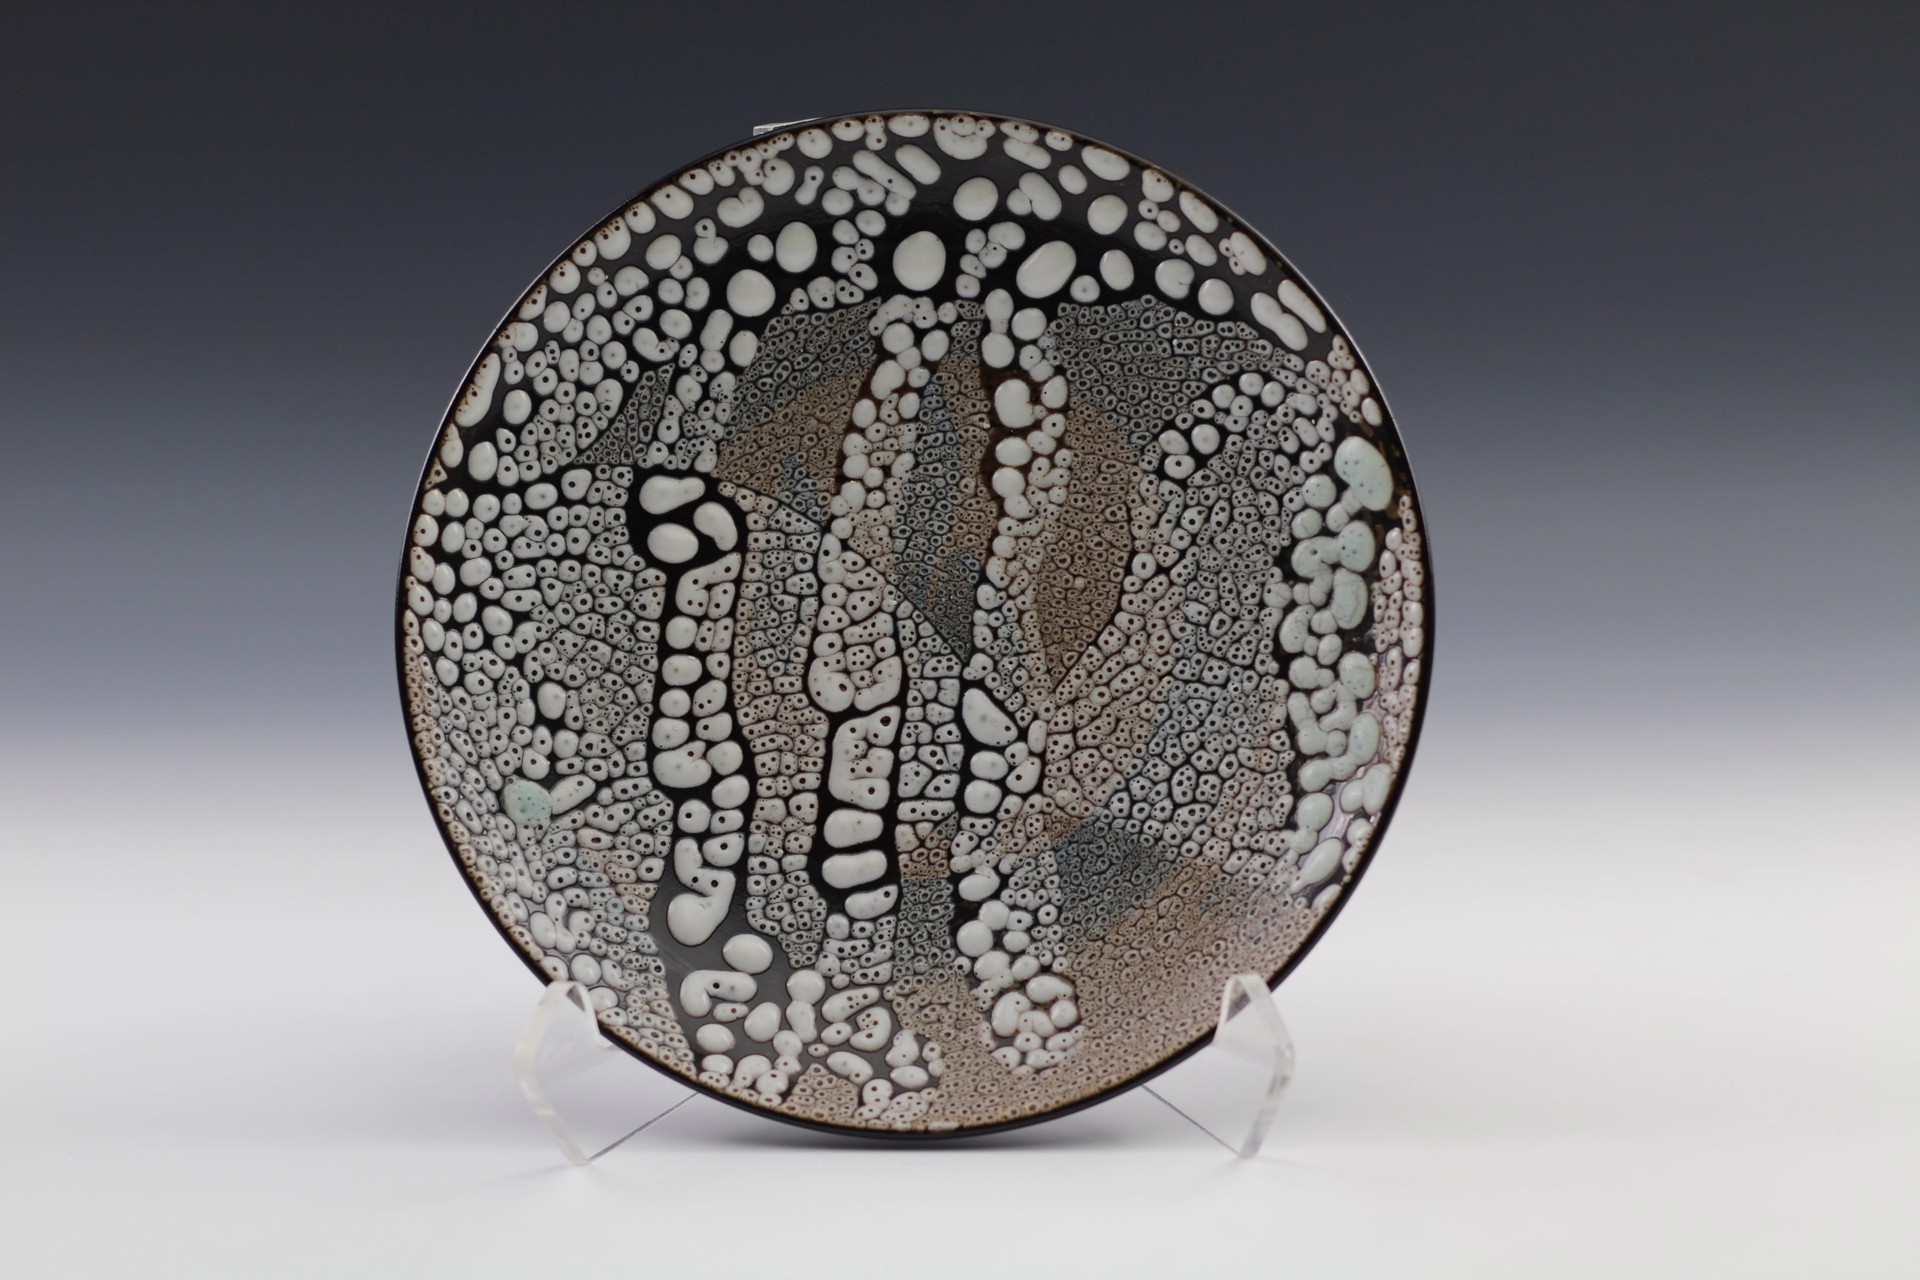 Plate by Charlie Olson